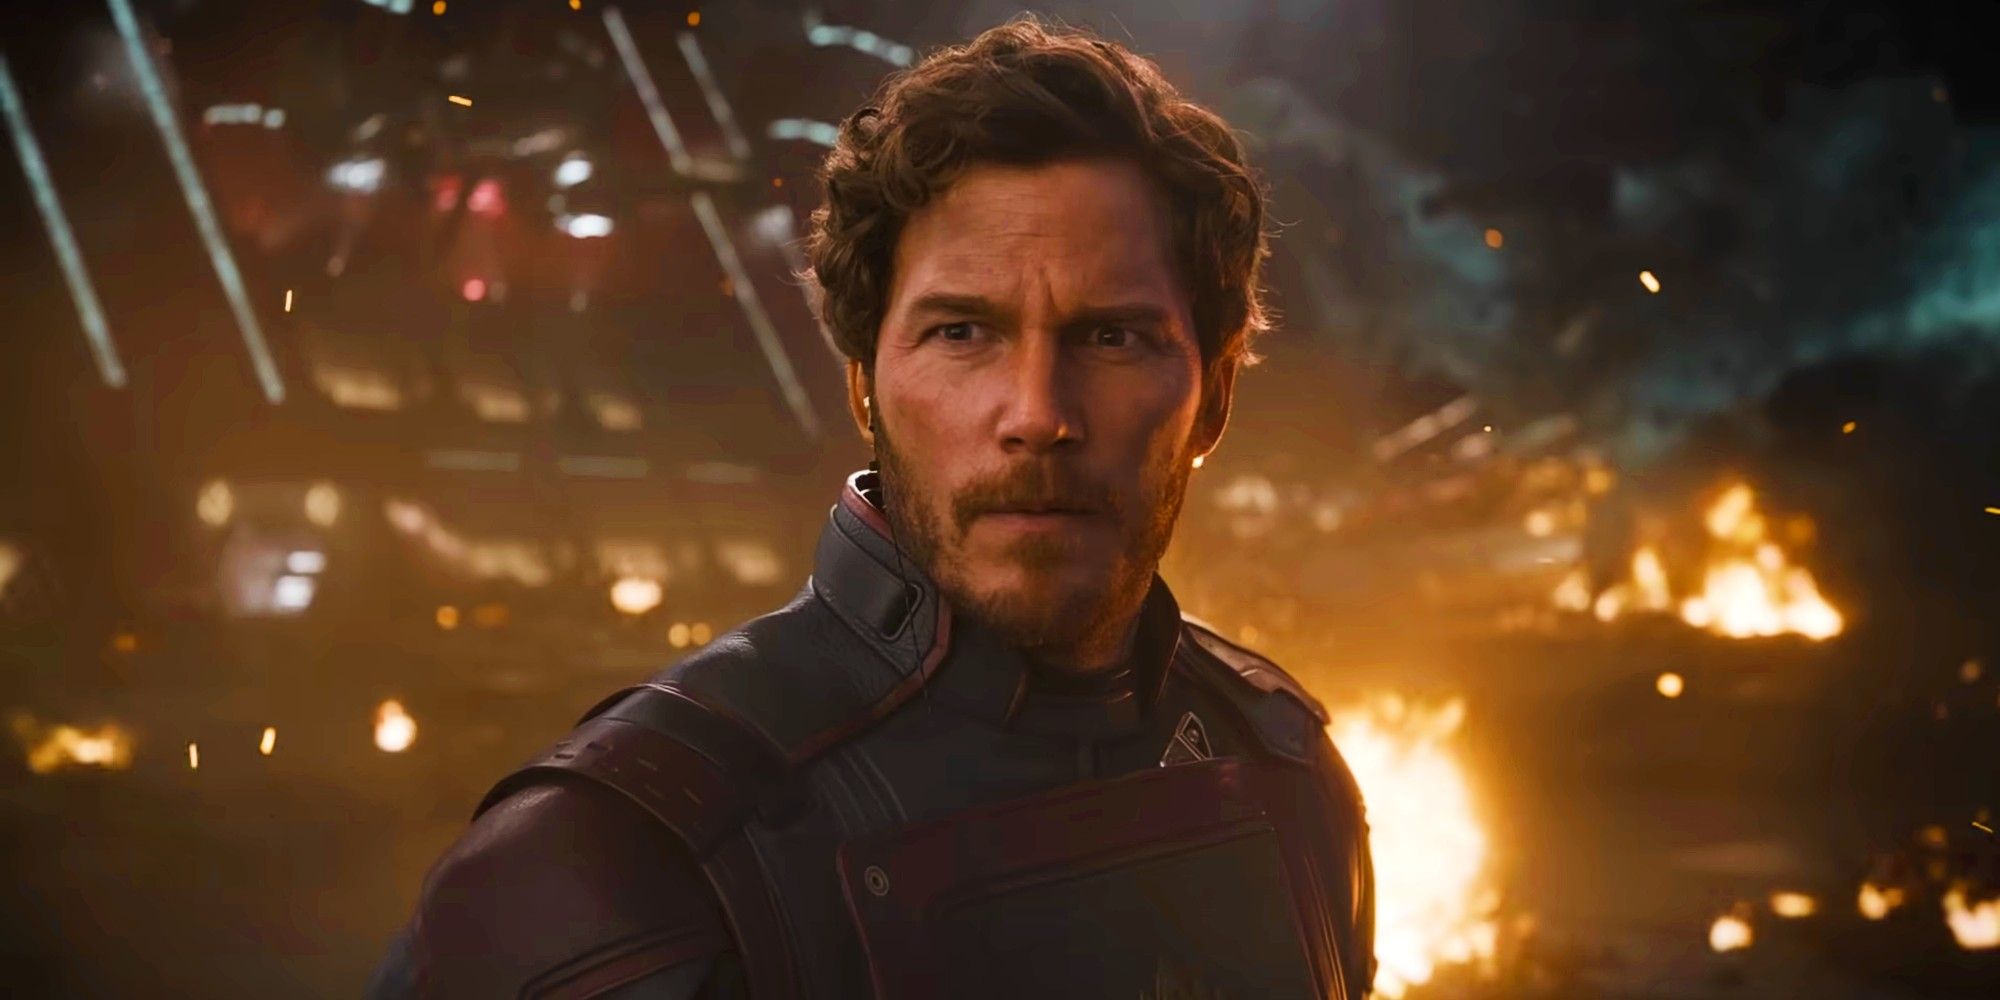 Chris Pratt as Star-Lord standing in front of a fiery background in Guardians of the Galaxy Vol 3